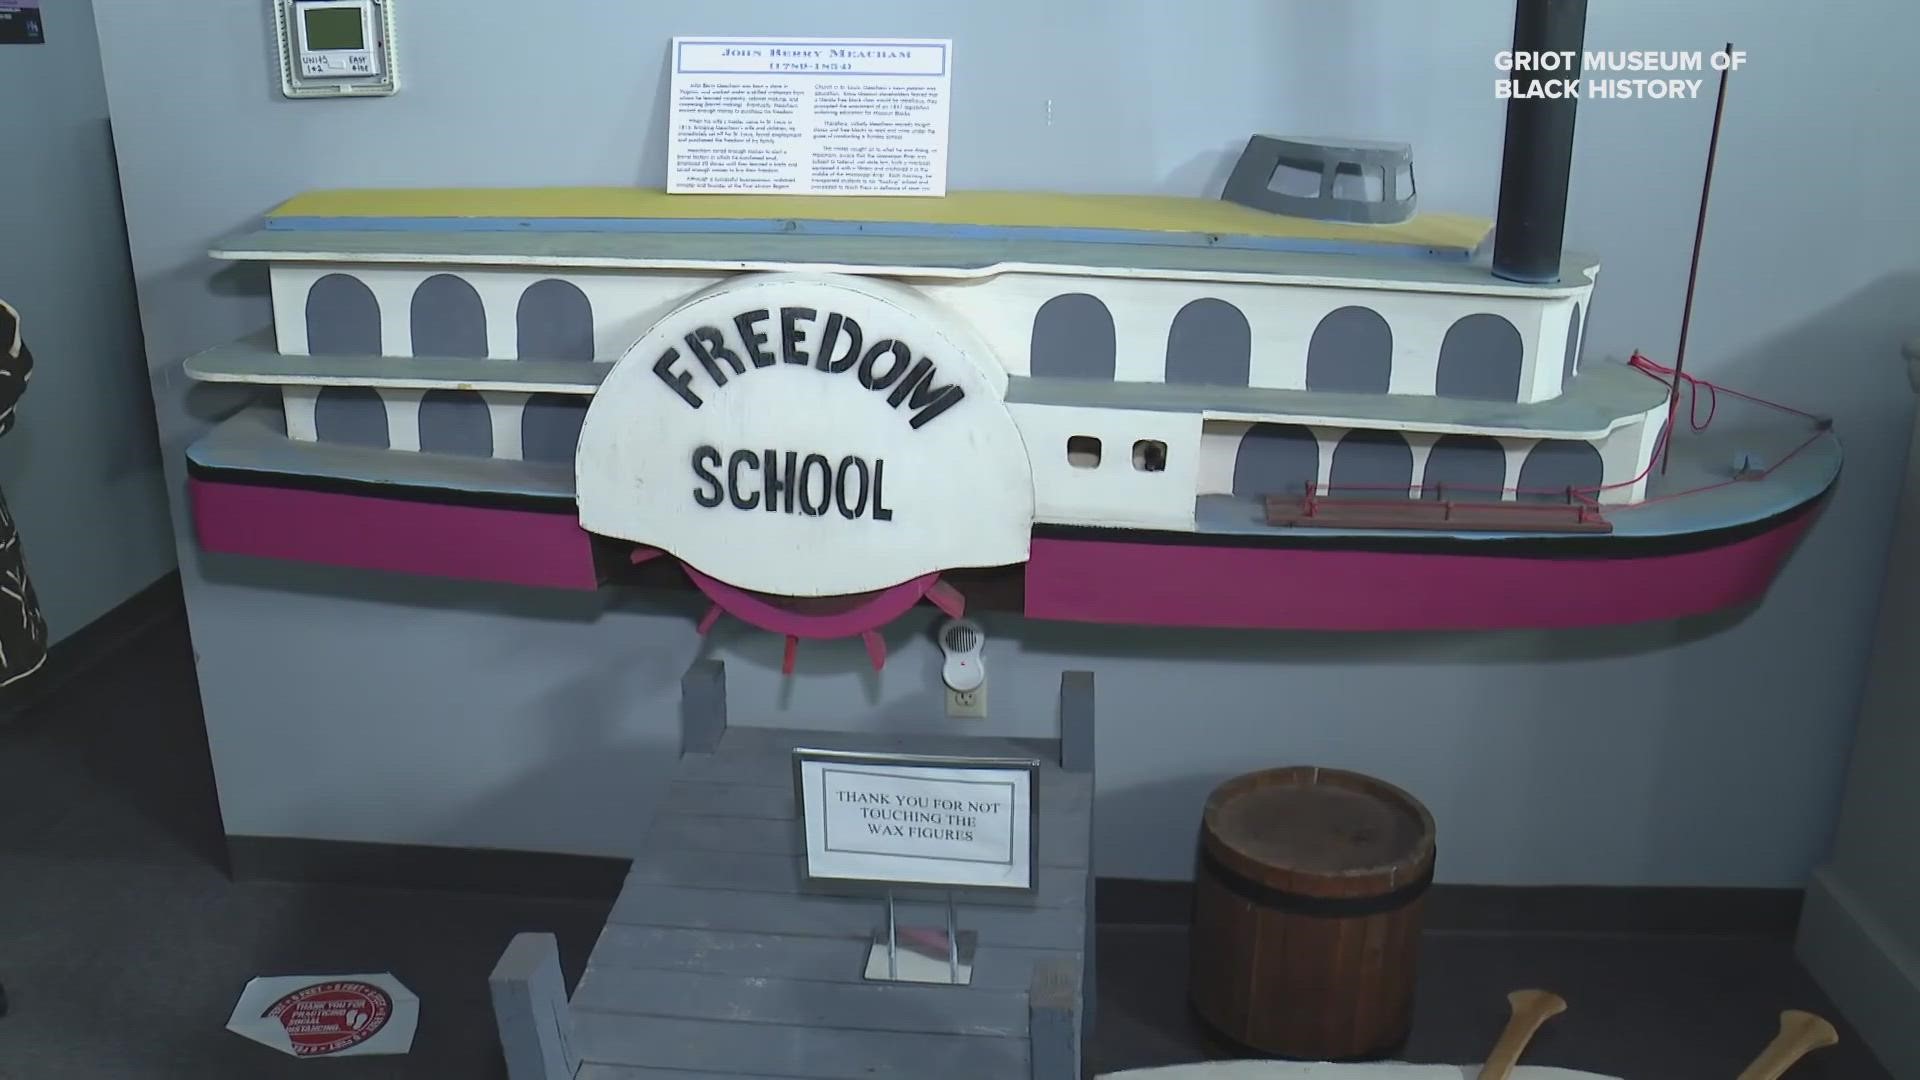 The Floating Freedom School was made after Missouri banned education for Black students. Meachum made a steamboat into a school so Black people could keep learning.